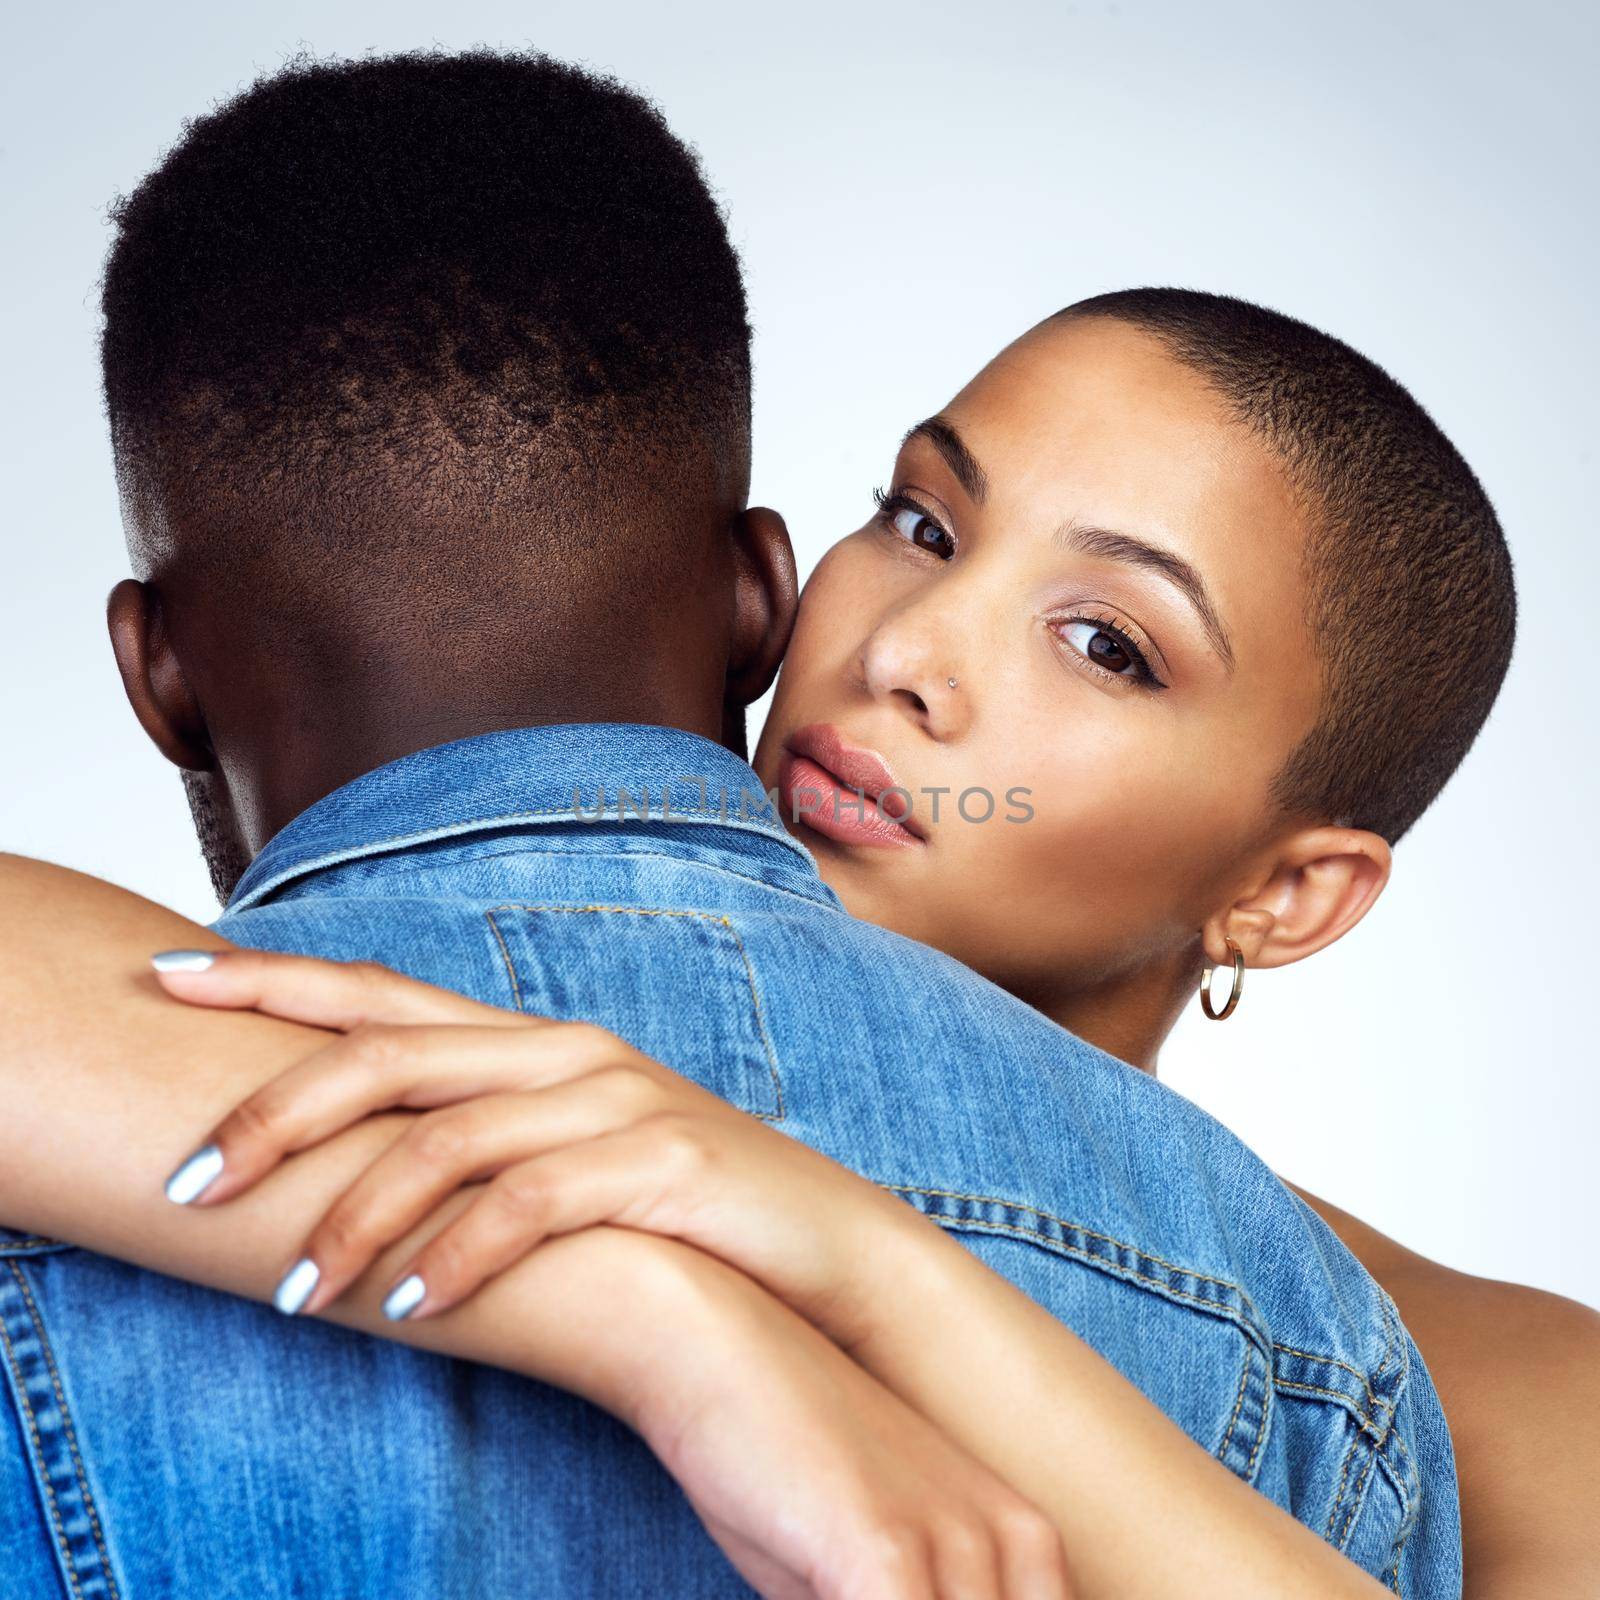 Studio shot of a young couple embracing each other against a grey background.